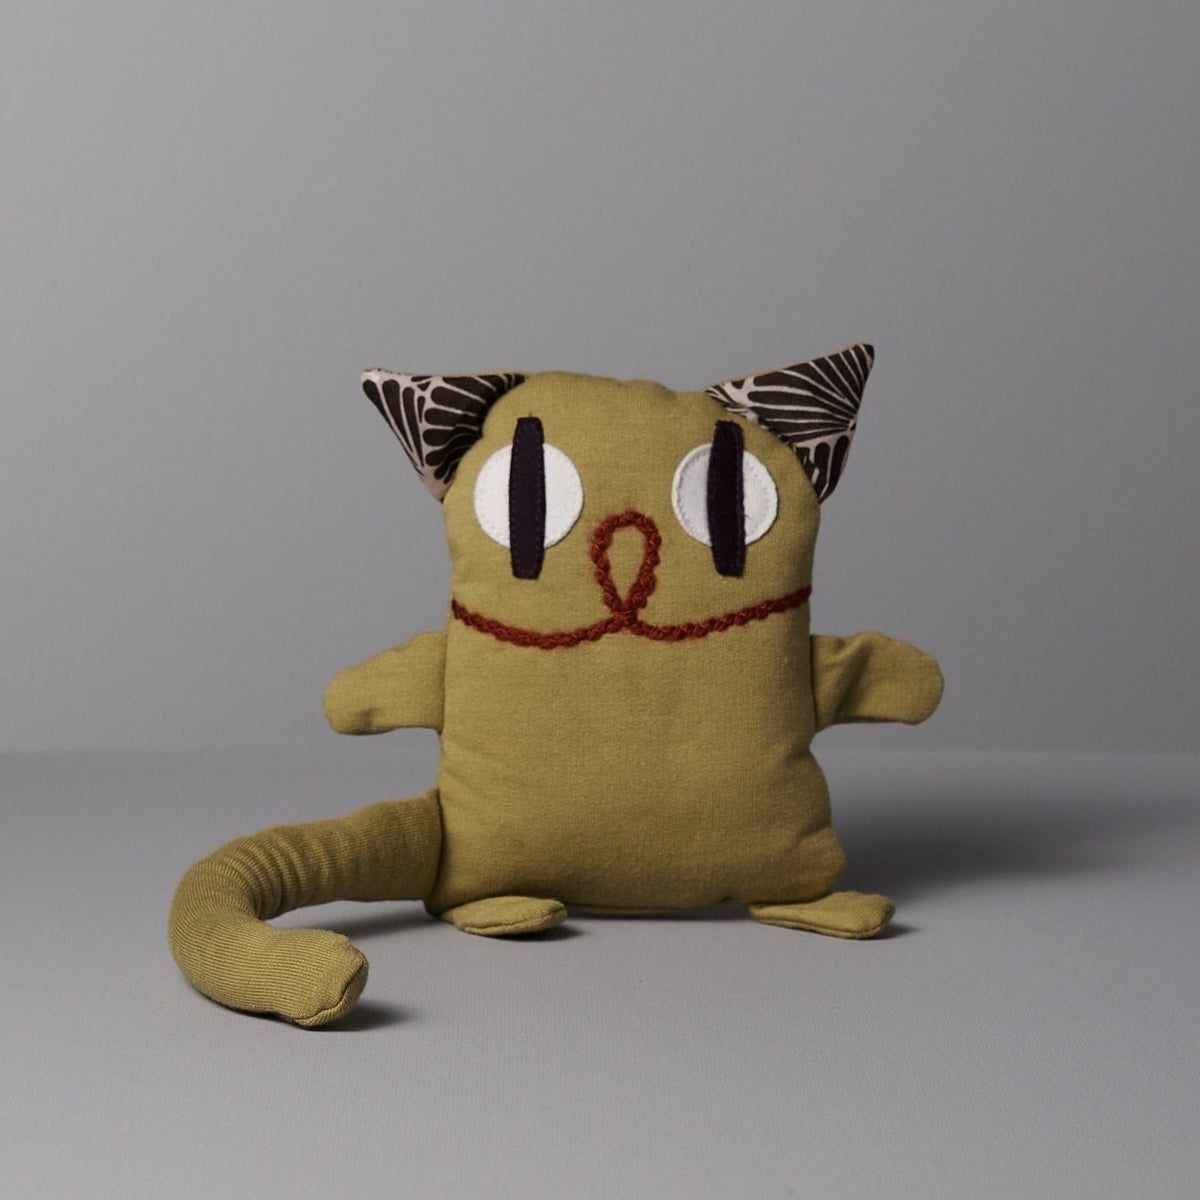 A yellow Serge the Cat stuffed animal on a grey background by Raplapla.